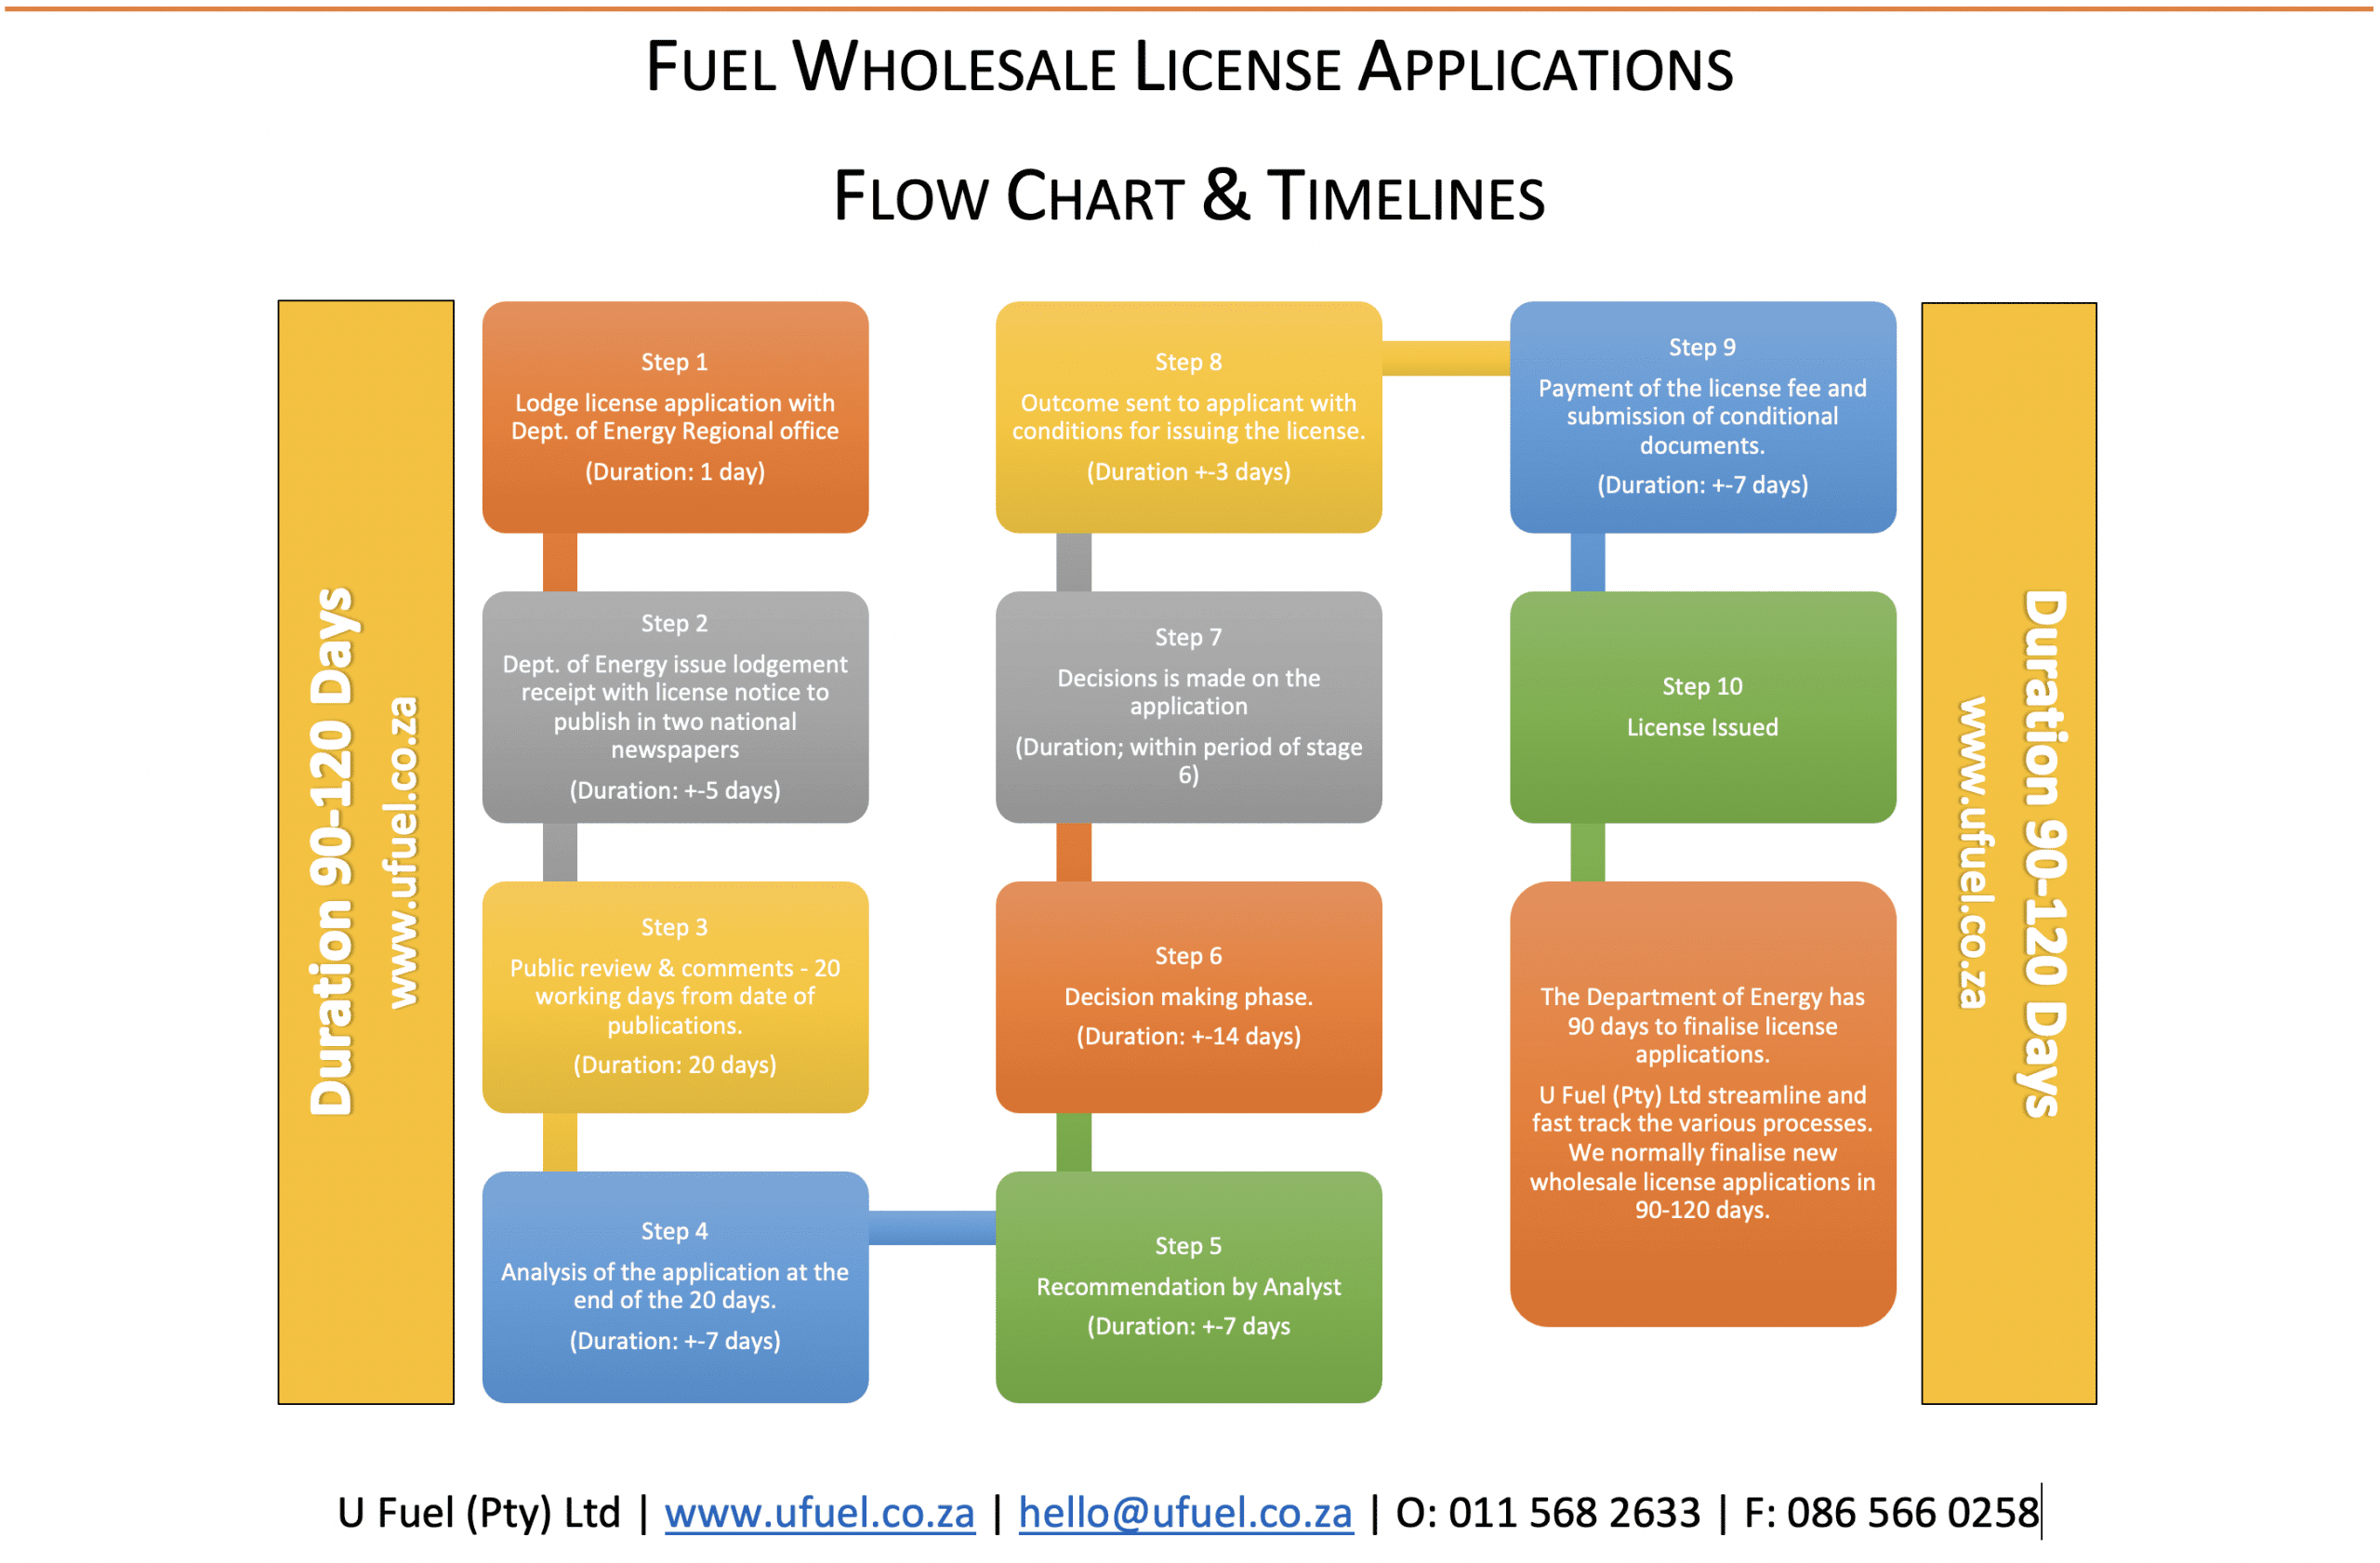 business plan for wholesale license